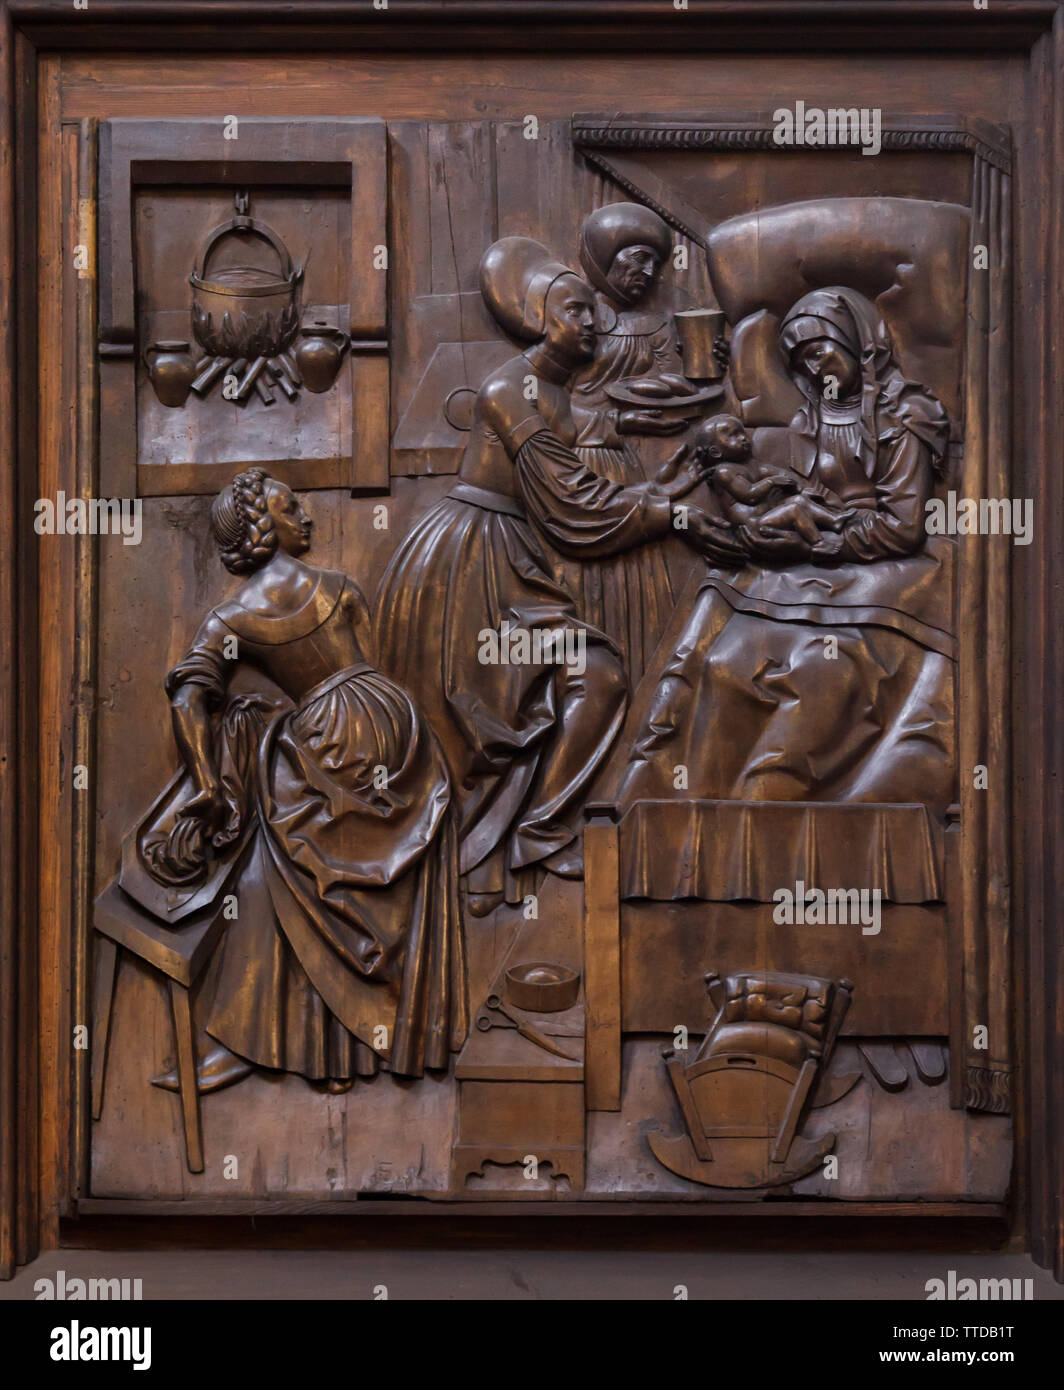 Nativity of the Virgin Mary depicted in the basswood carved relief by German sculptor Veit Stoss (Veit Stoß) on left side wing of the Nativity Altar (Veit-Stoß-Altar) in the Bamberg Cathedral (Bamberger Dom) in Bamberg, Upper Franconia, Germany. Stock Photo